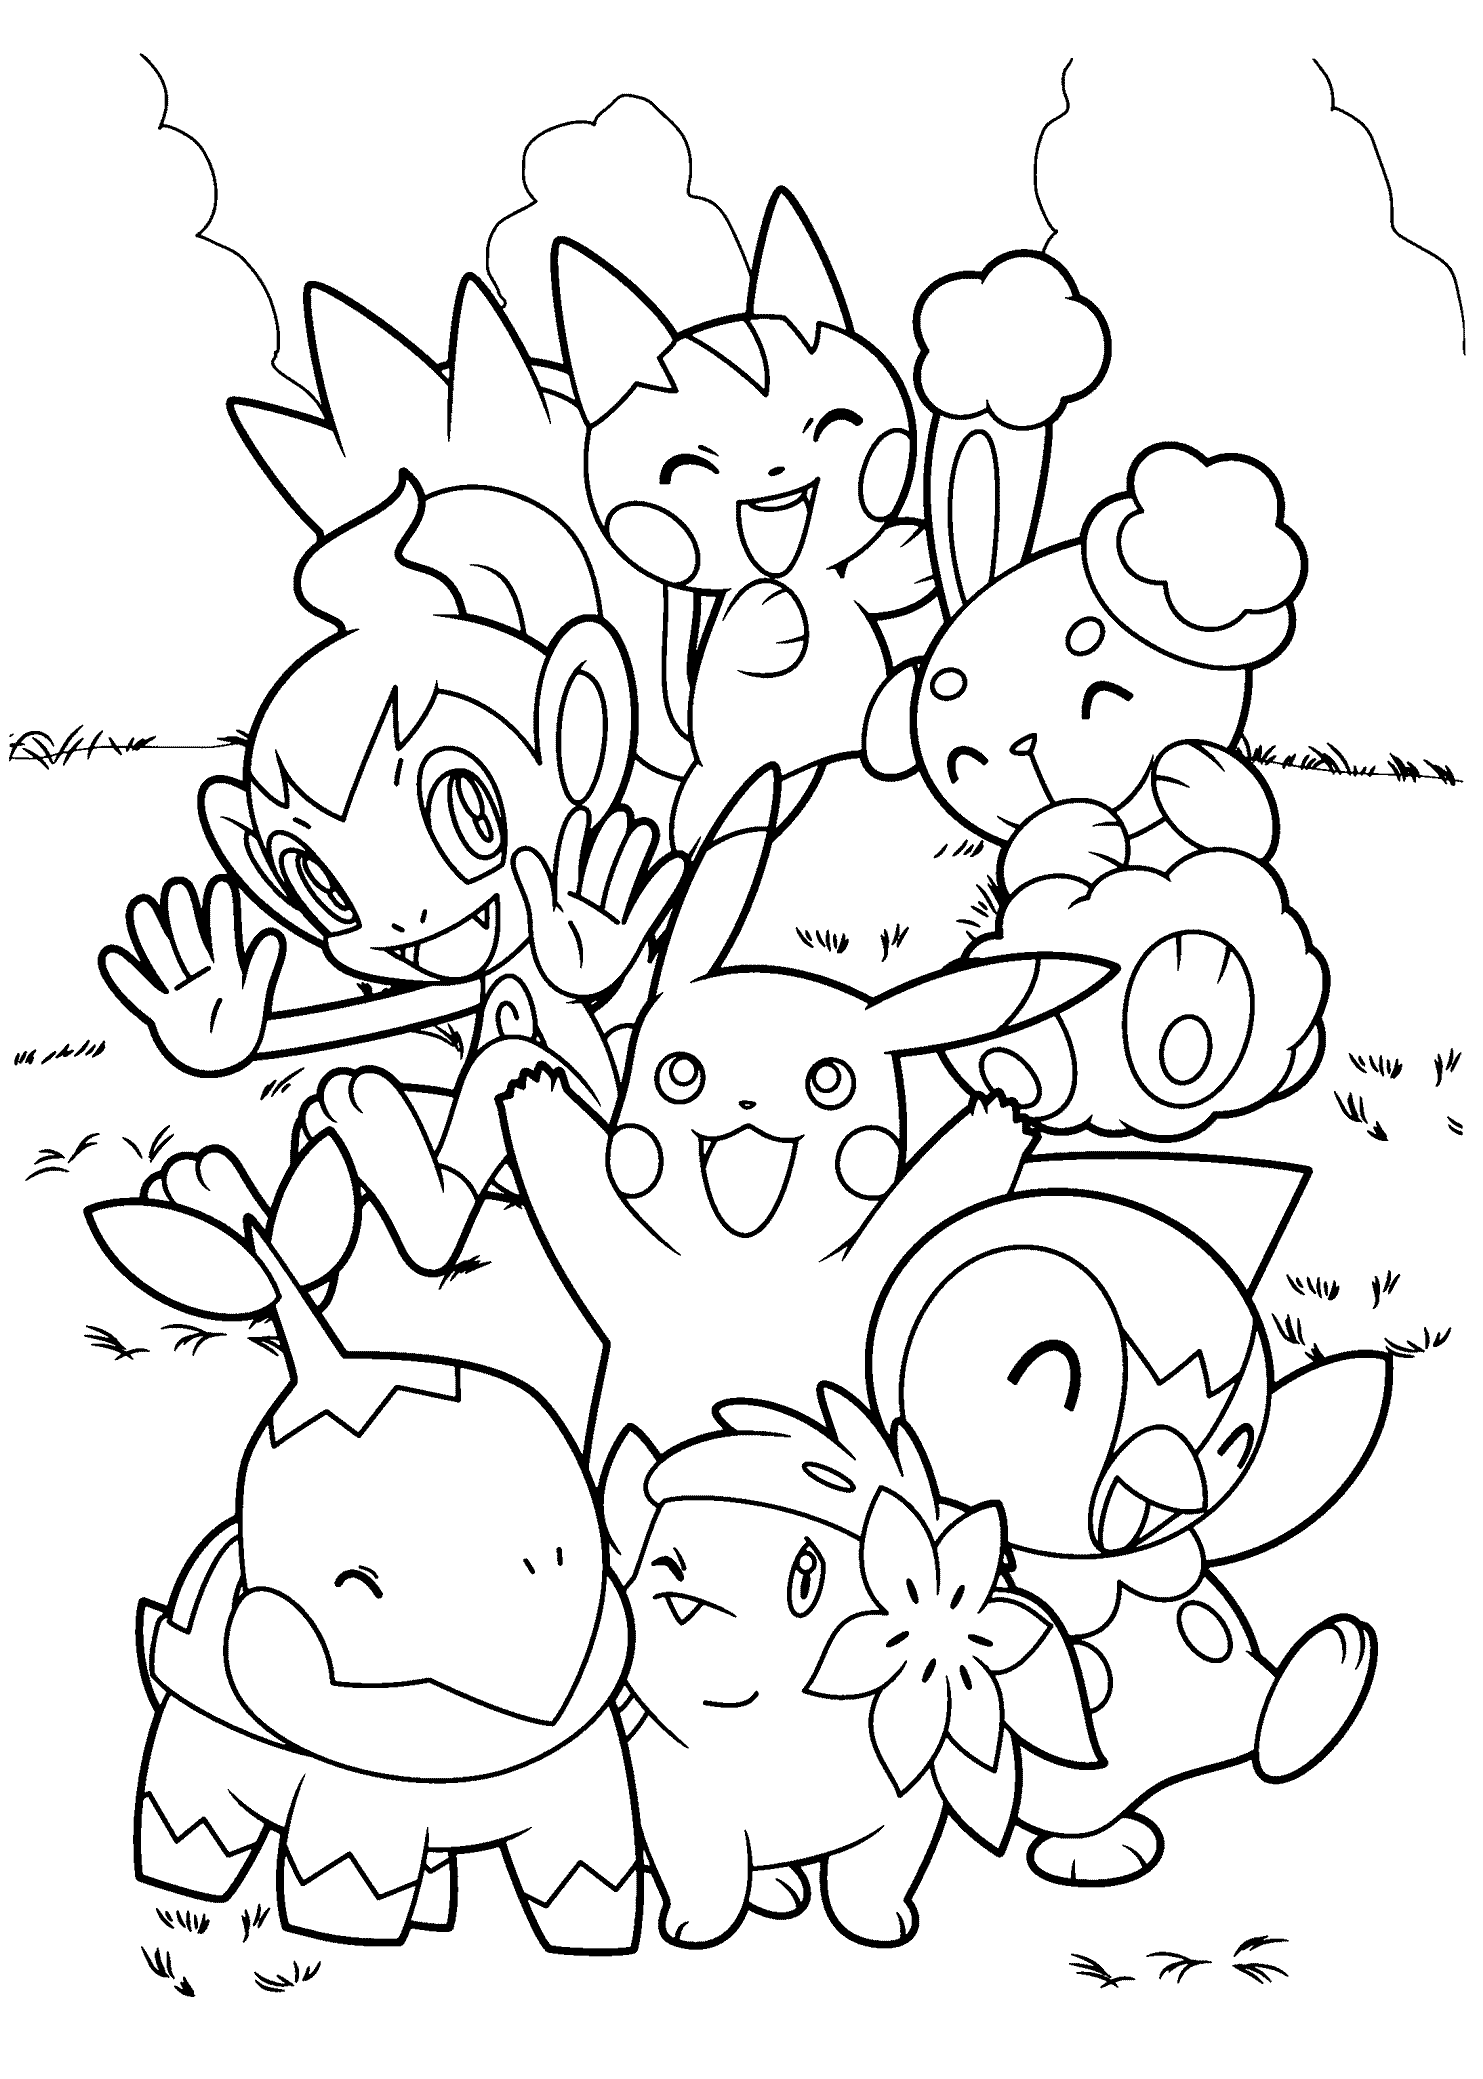 Pokemon Printable Coloring Pages